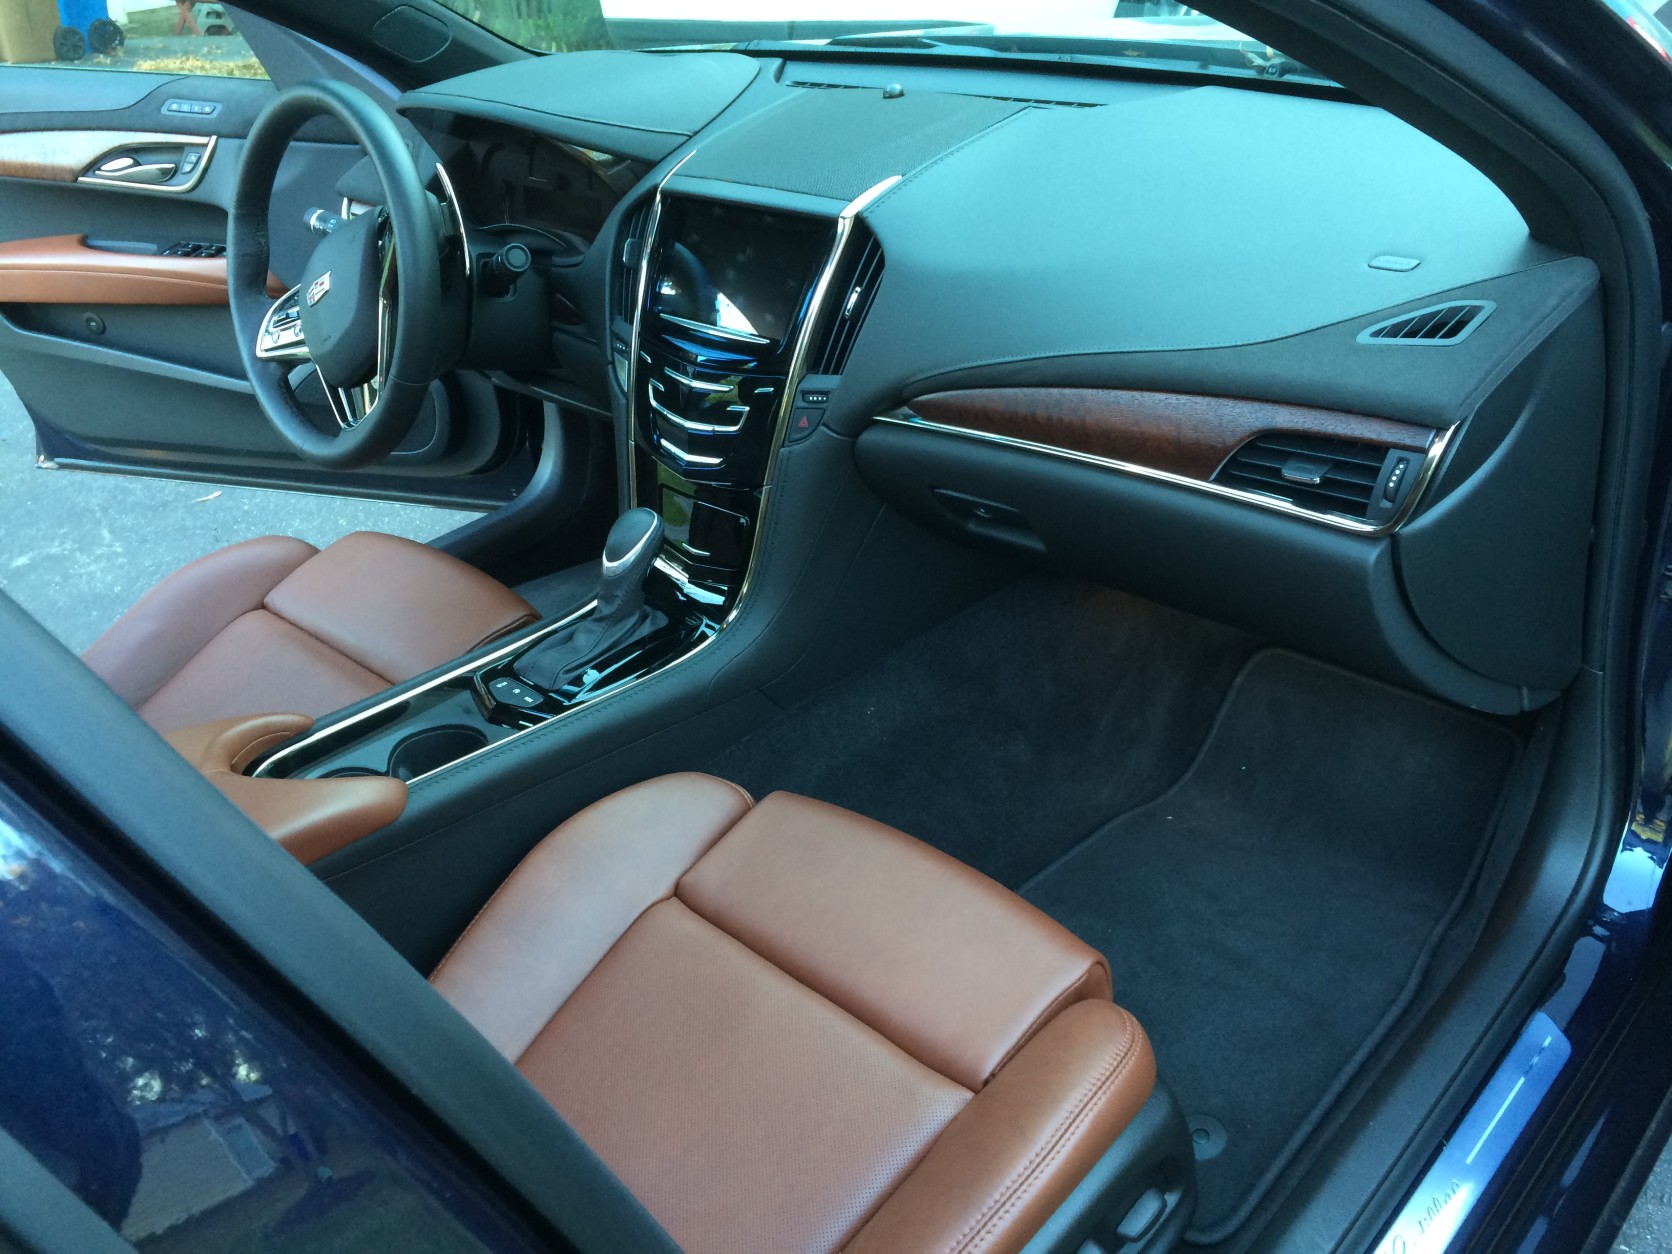 The interior with the Premium level ATS has a nice high quality cut/sewn interior with a dash with contest stitching. (WTOP/Mike Parris)